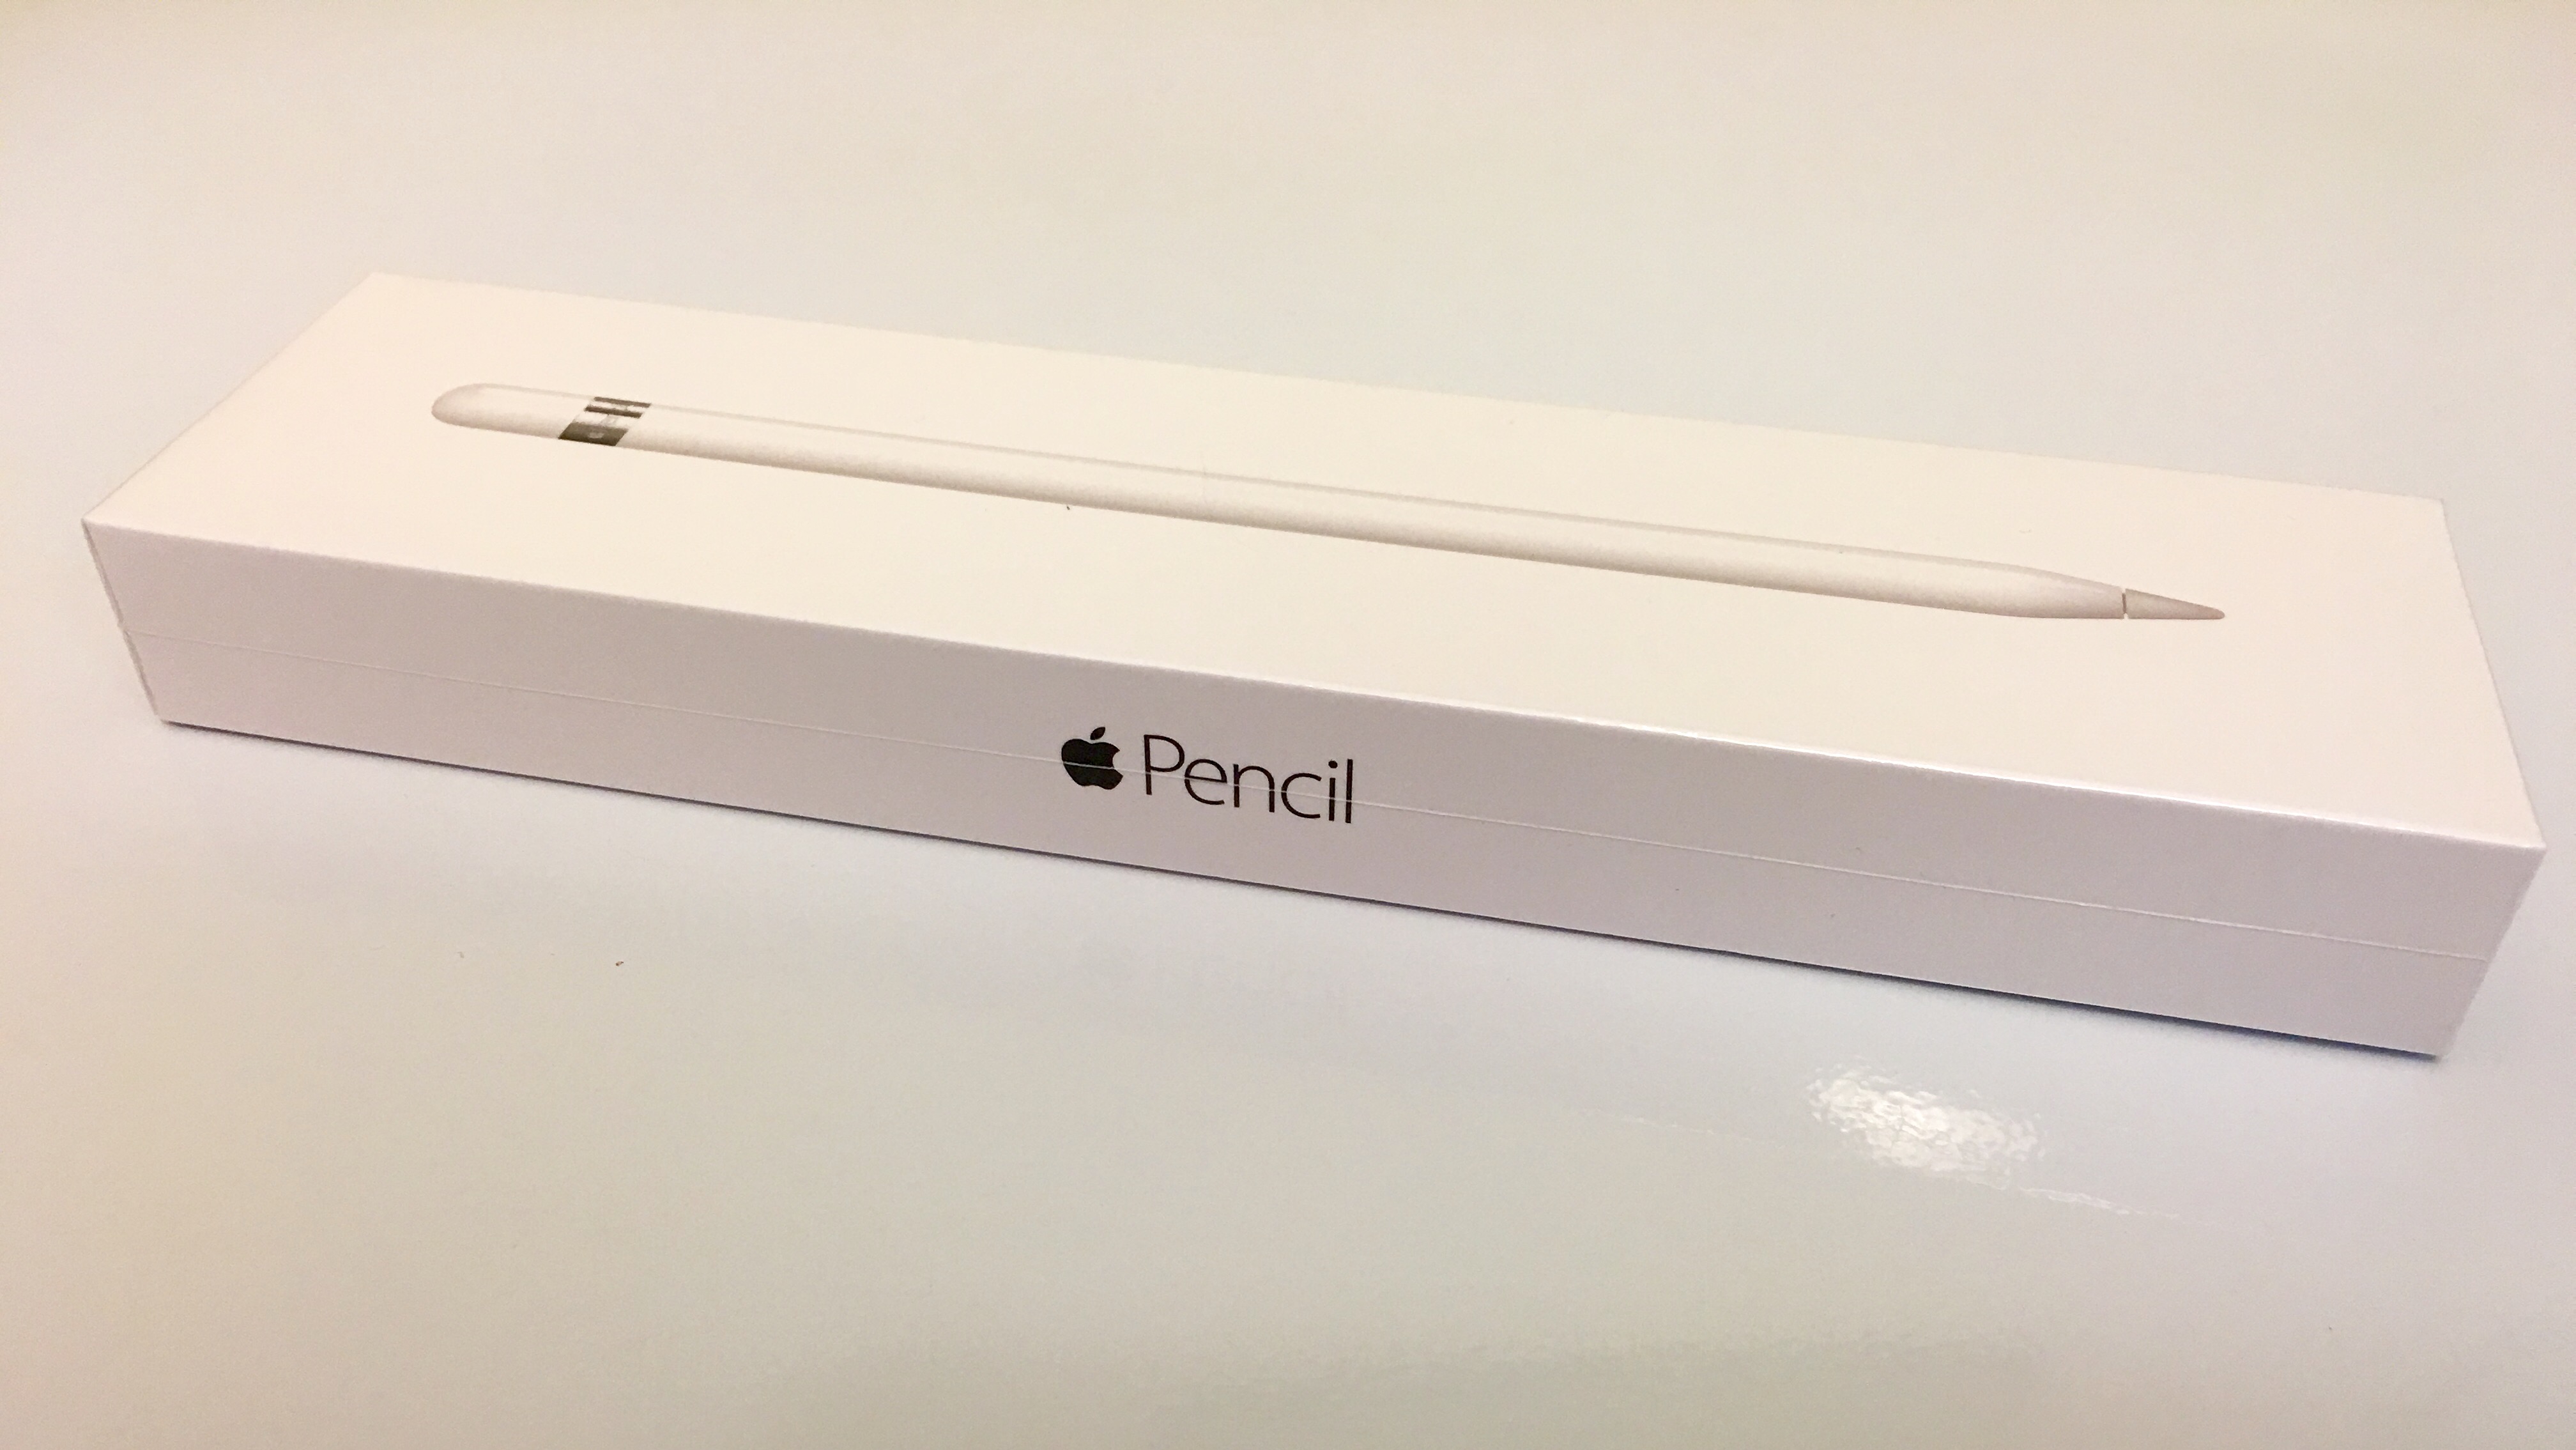 Apple Pencil hands-on 11